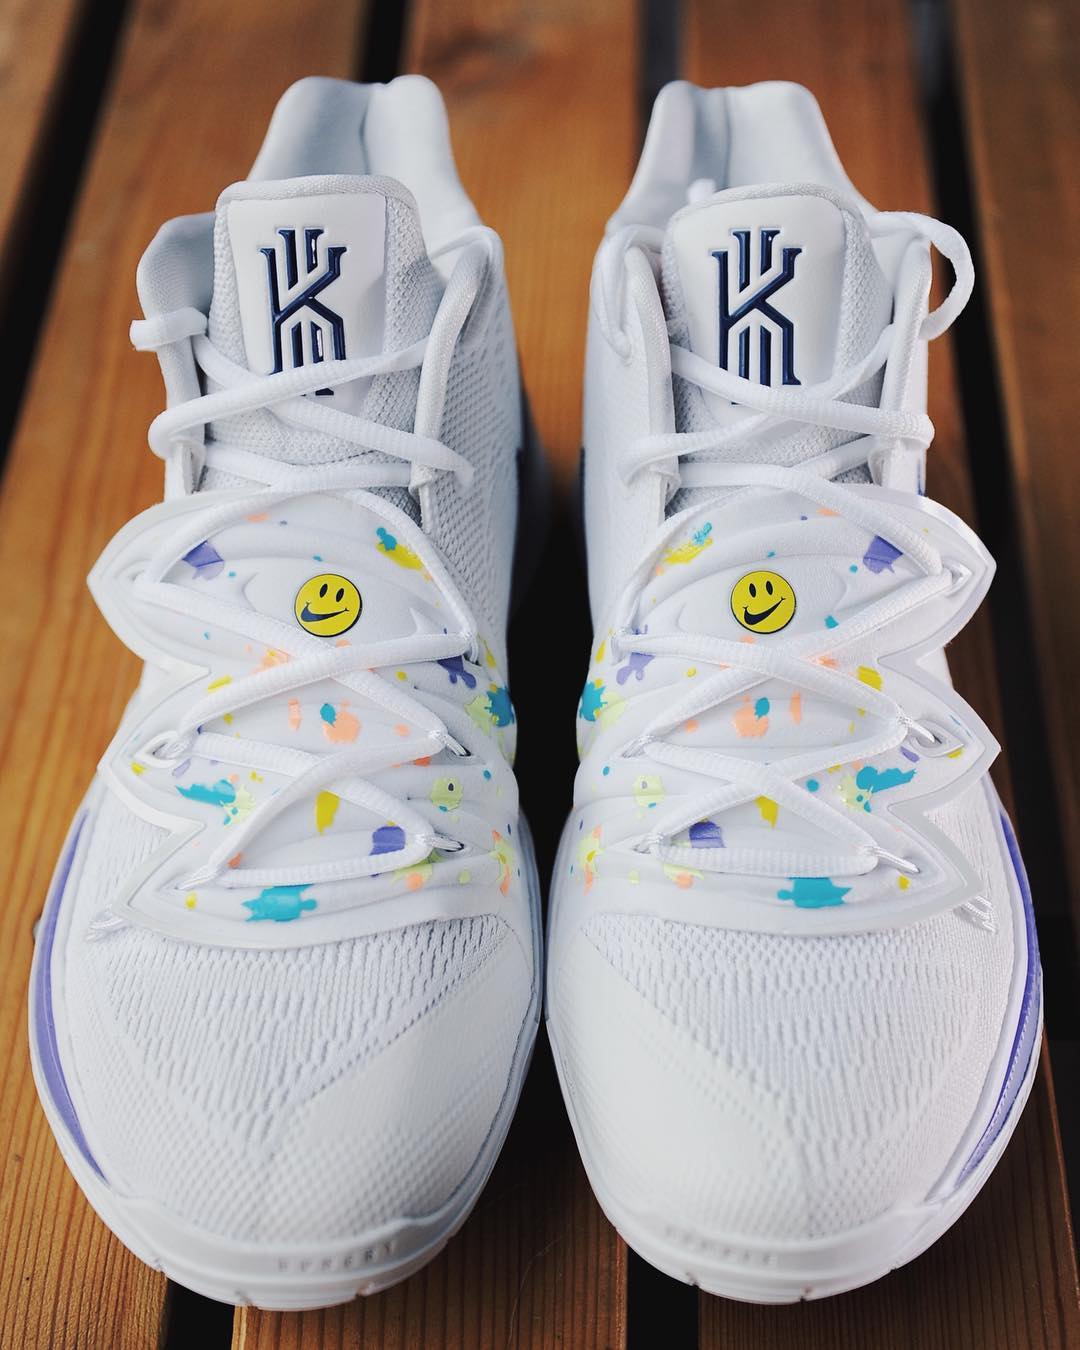 Nike,Kyrie 5,Have a Nike Day,发  周末约场球？Kyrie 5 “Have a Nike Day” 实物美图来了！